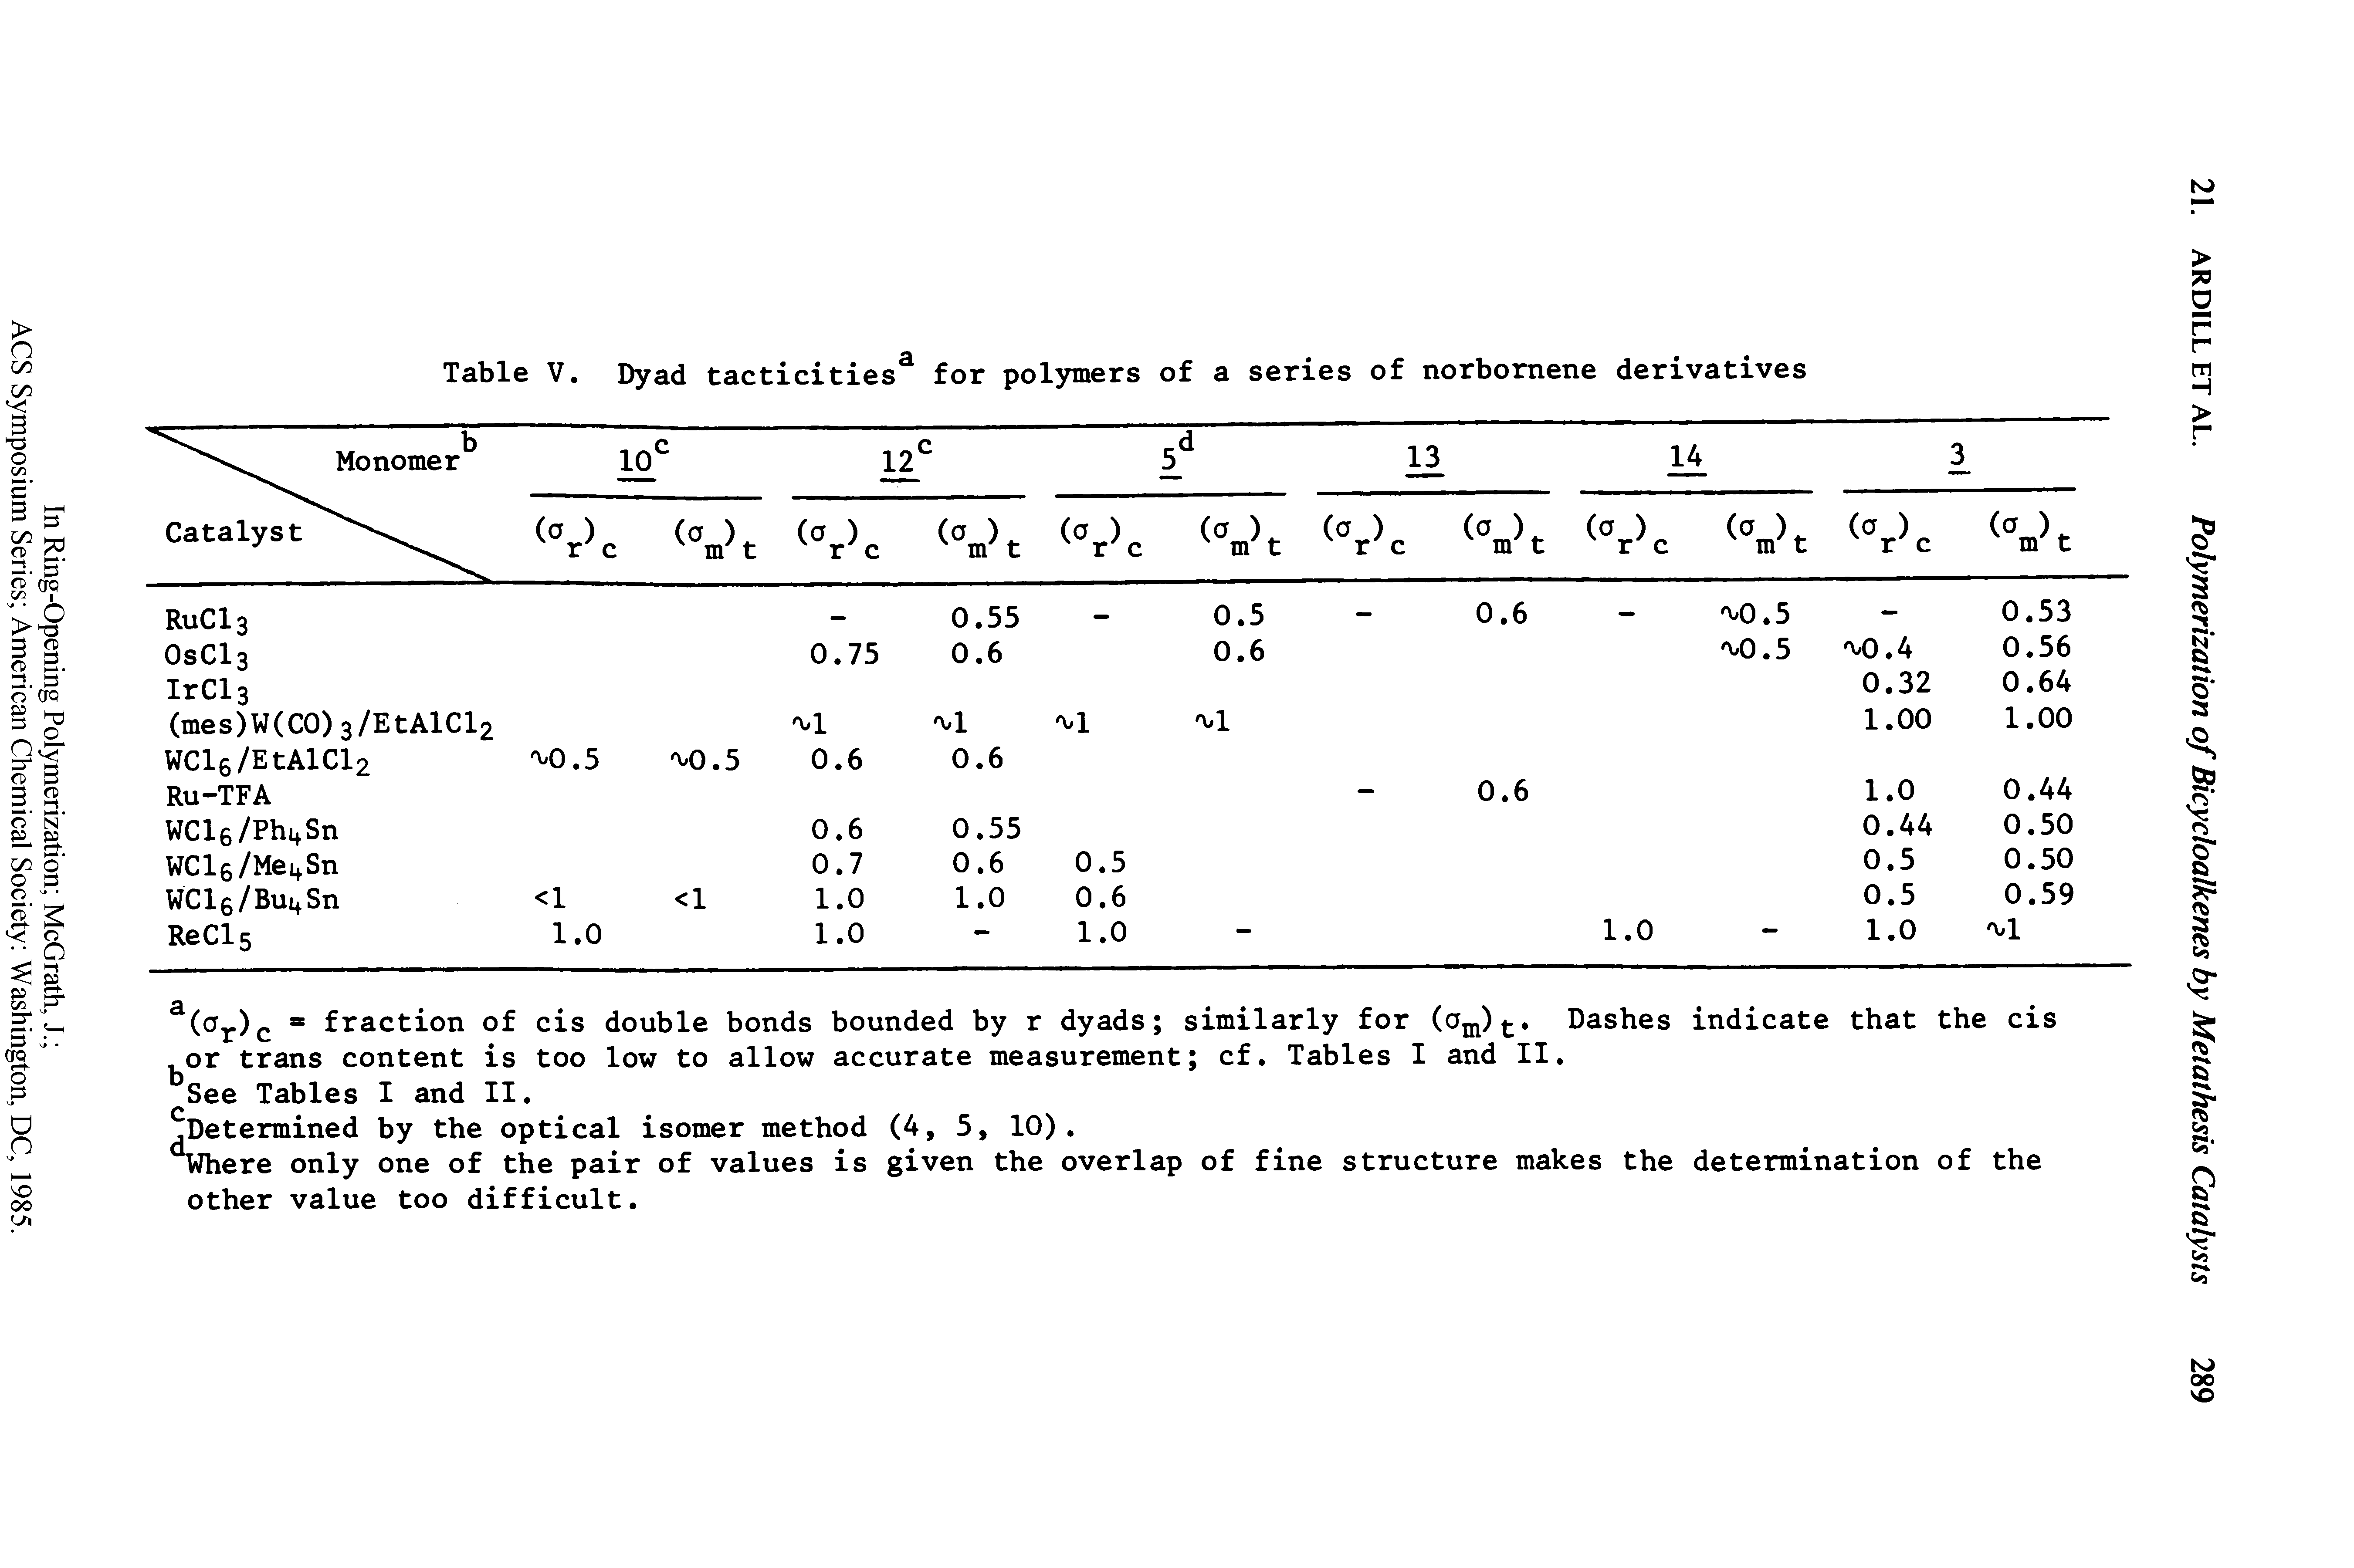 Table V. Dyad tacticities for poljnners of a series of norbornene derivatives...